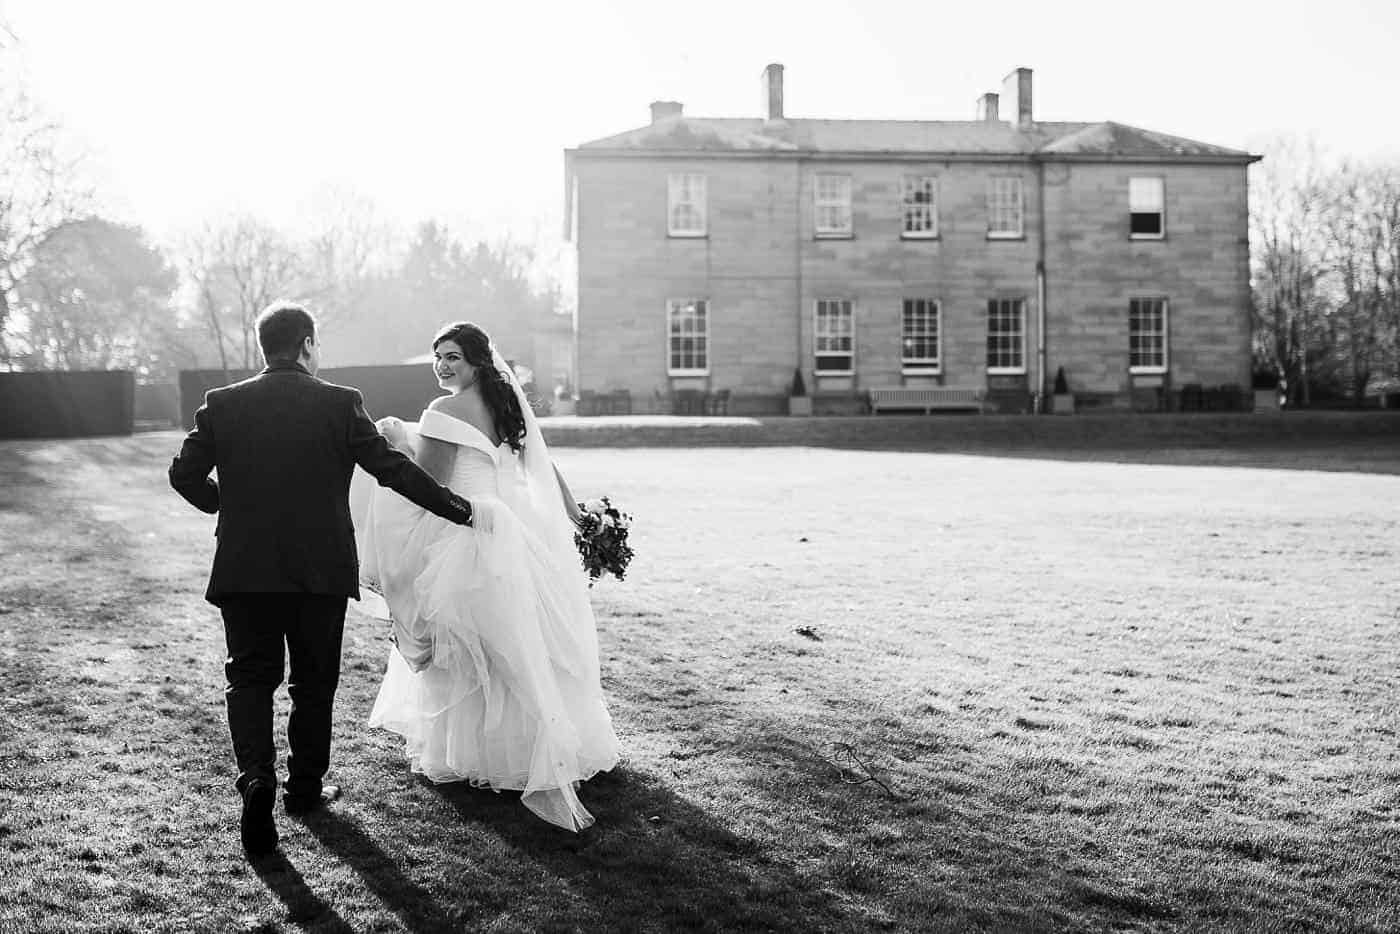 Yorkshire wedding photographer is what I call myself, as seen in these photos husband and wife team